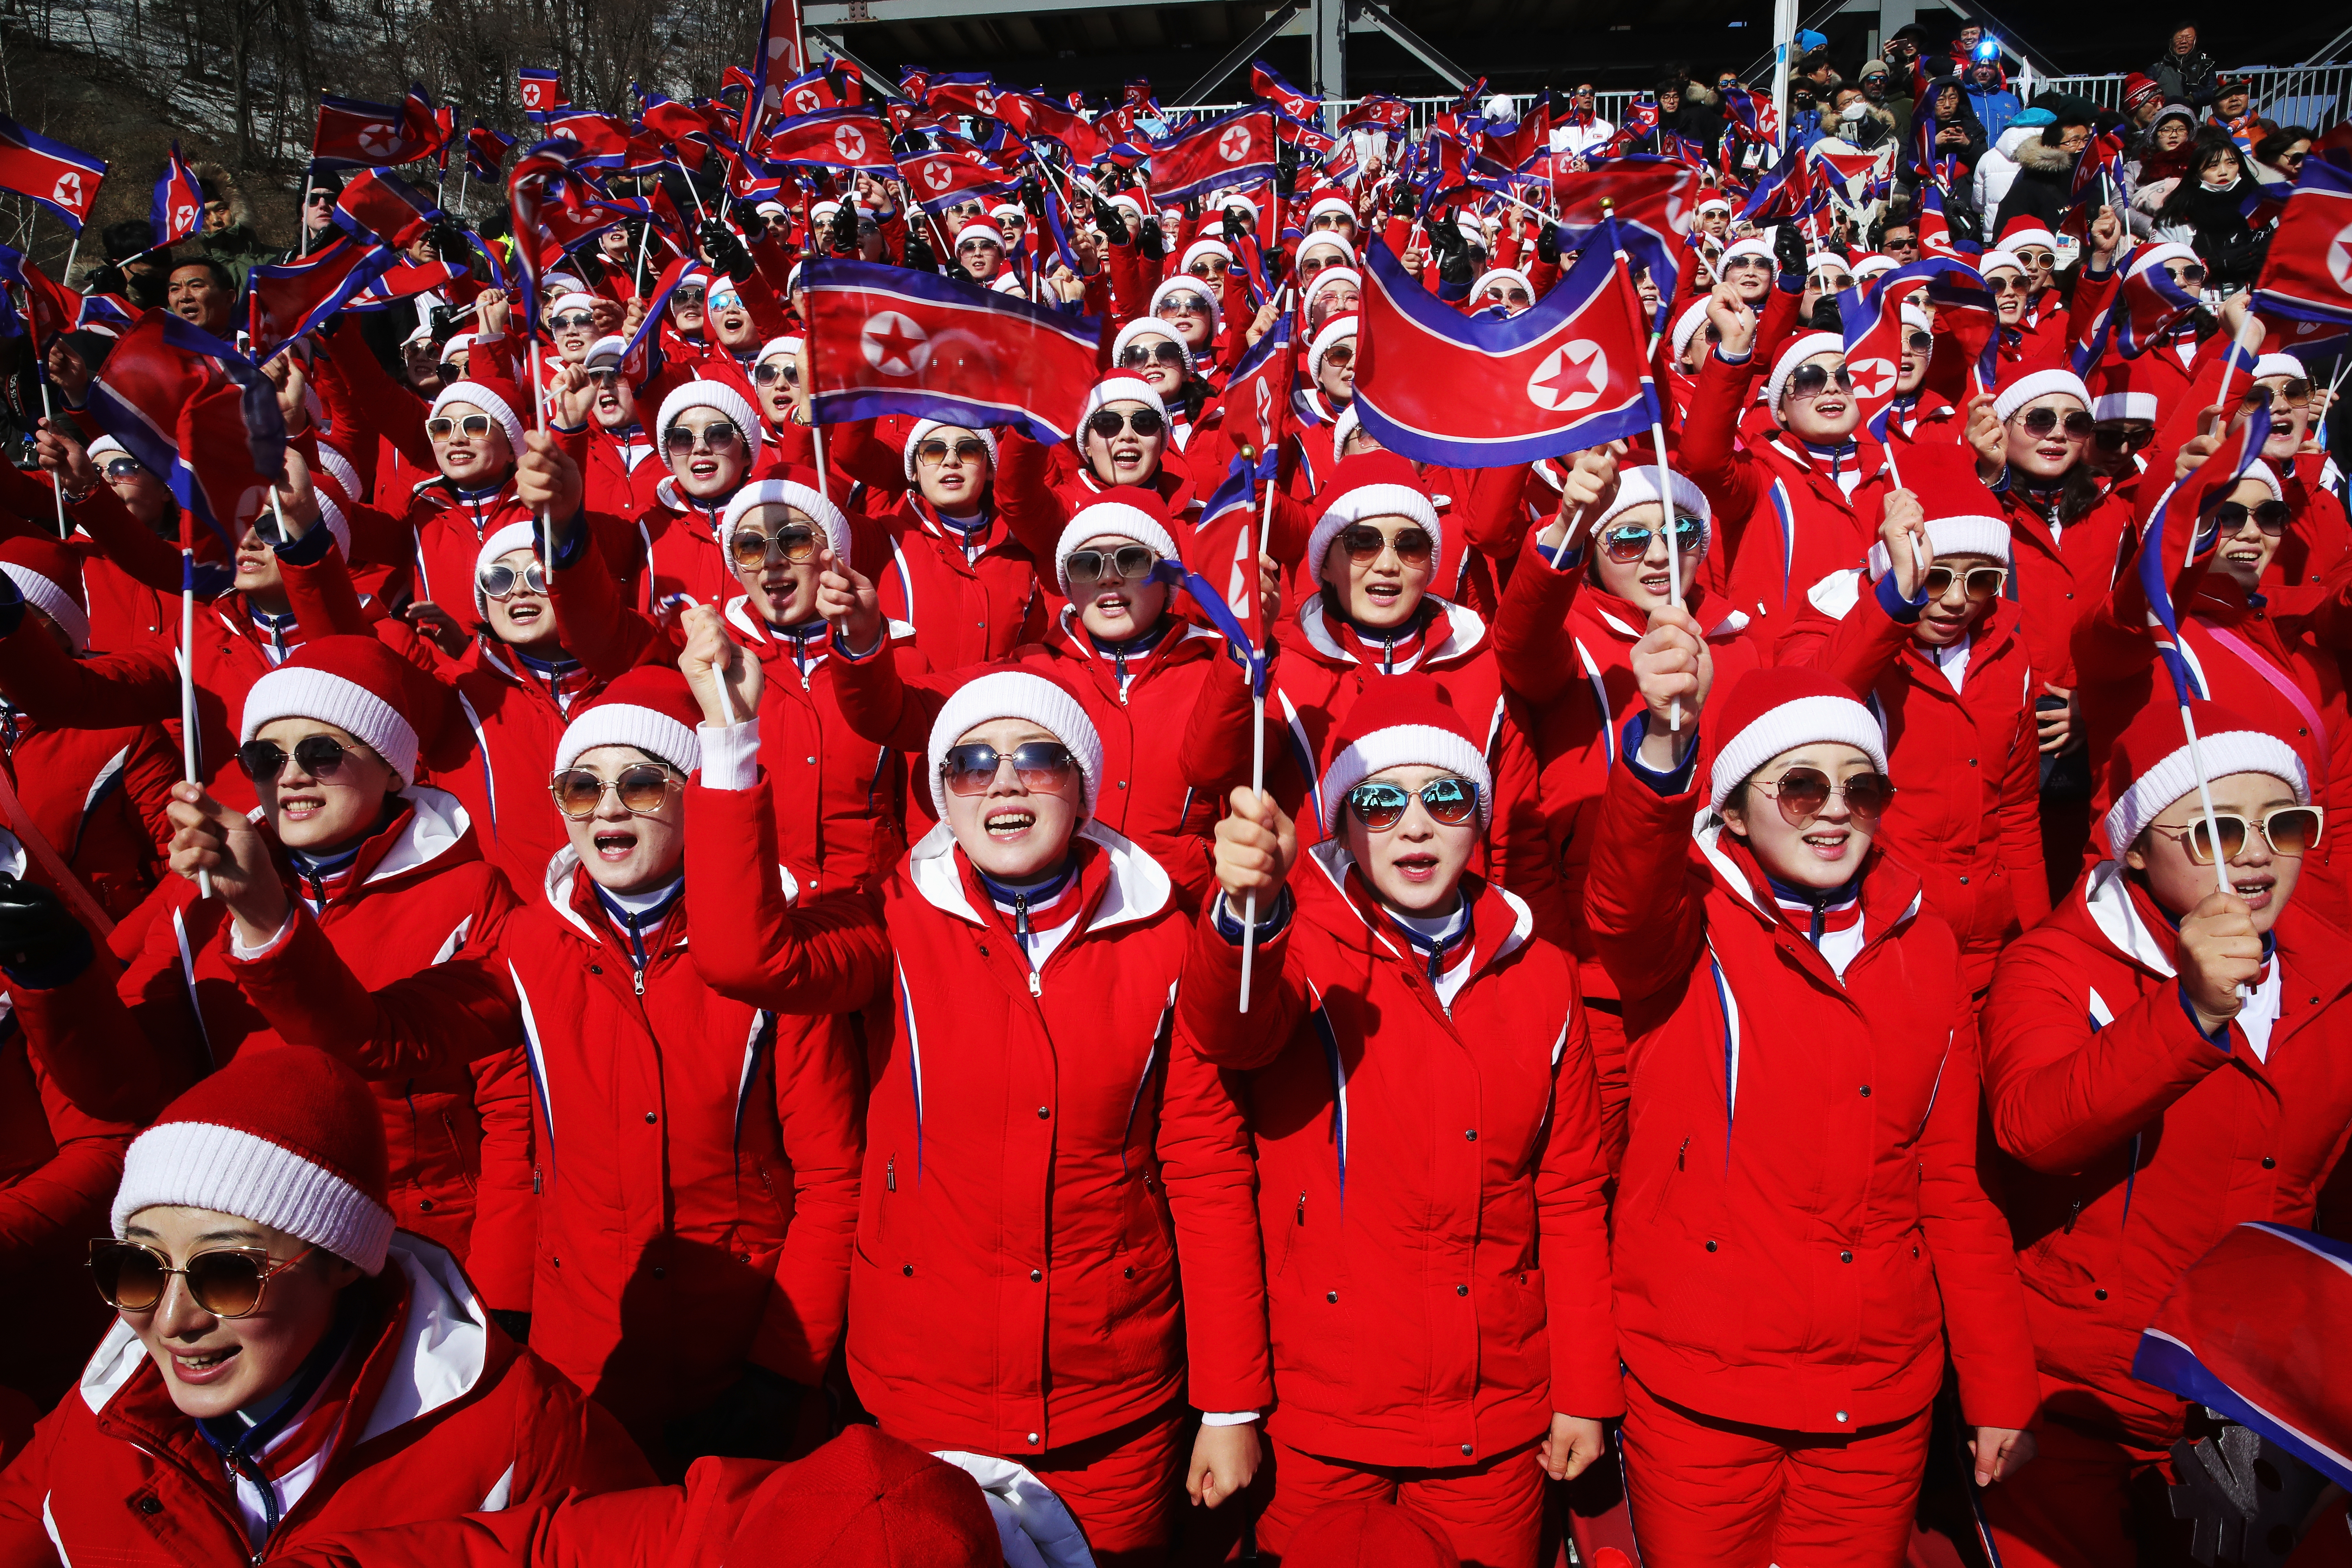 North Korea fans cheer at the finish during the Men's Slalom on day 13 of the PyeongChang 2018 Winter Olympic Games at Yongpyong Alpine Centre in South Korea photo.